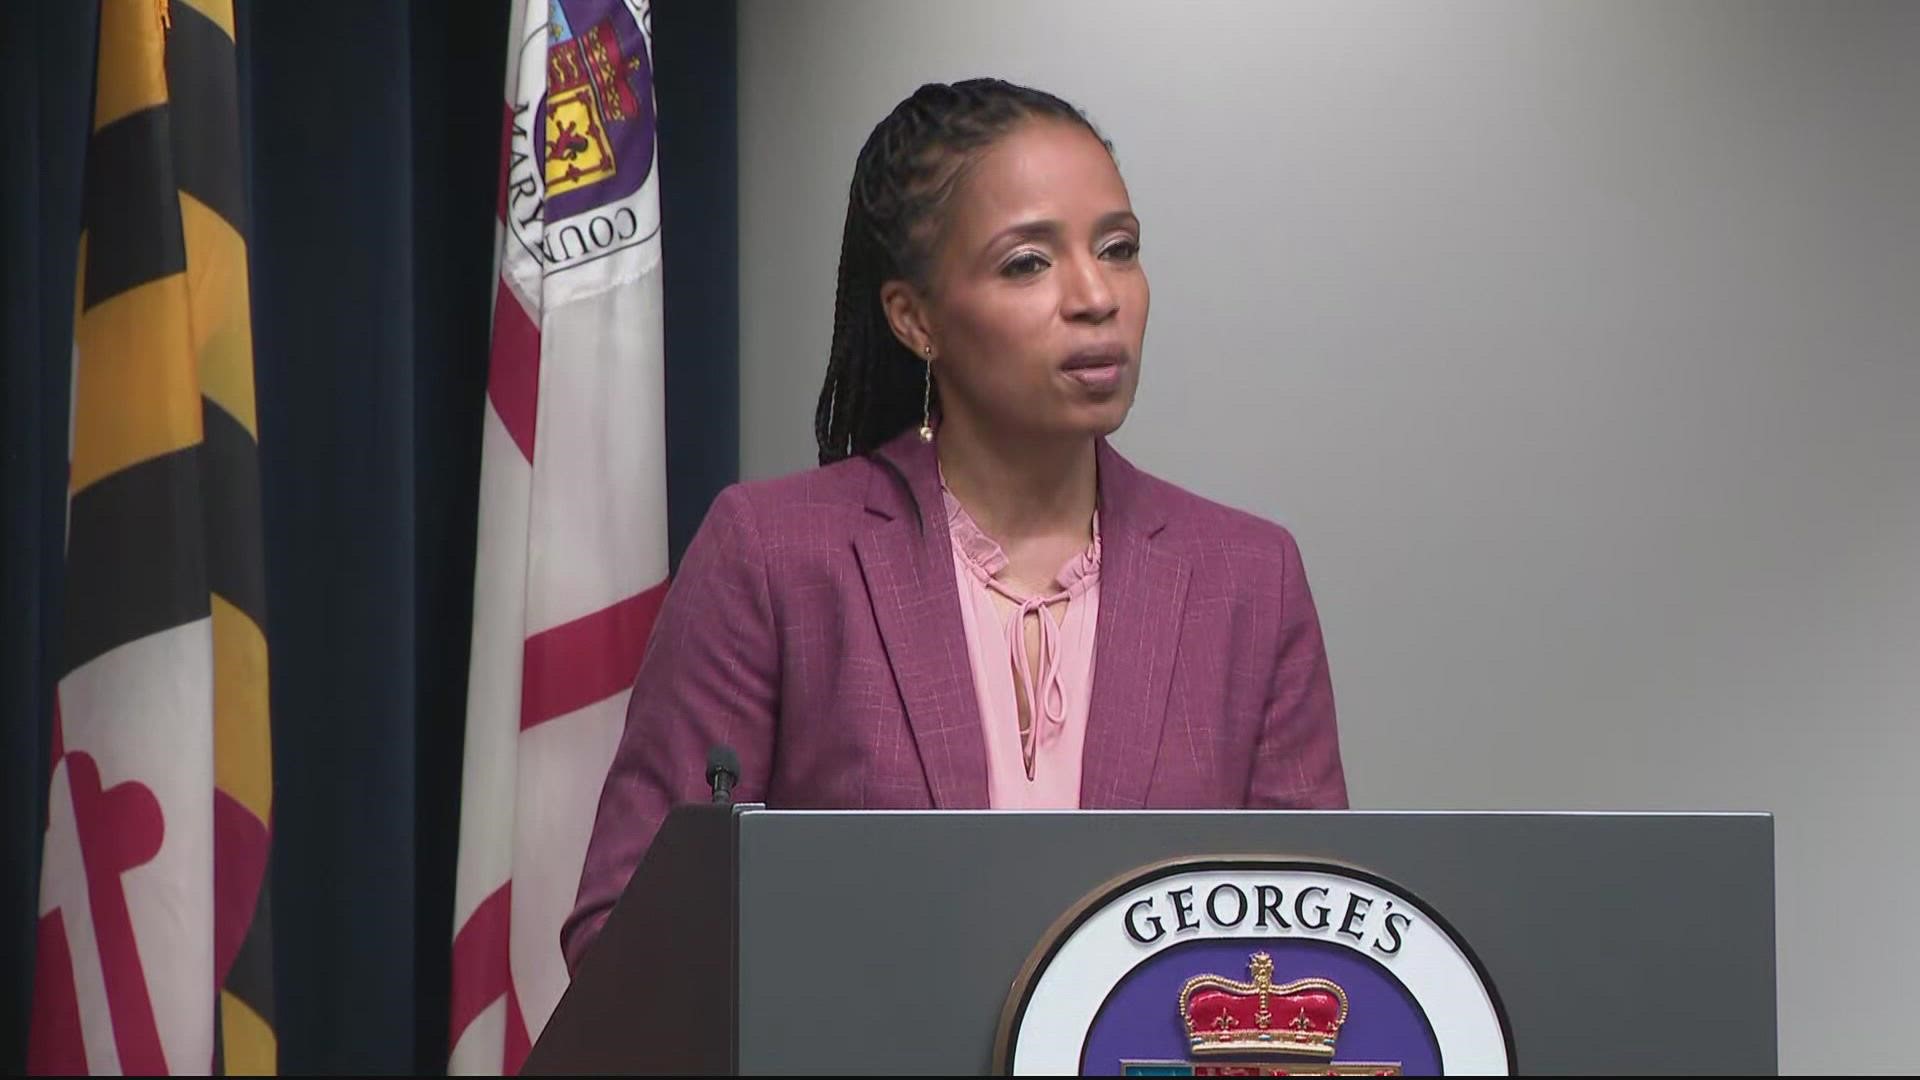 Prince George's County Executive Angela Alsobrooks announced Tuesday that the curfew for youth has been extended until the end of the year.